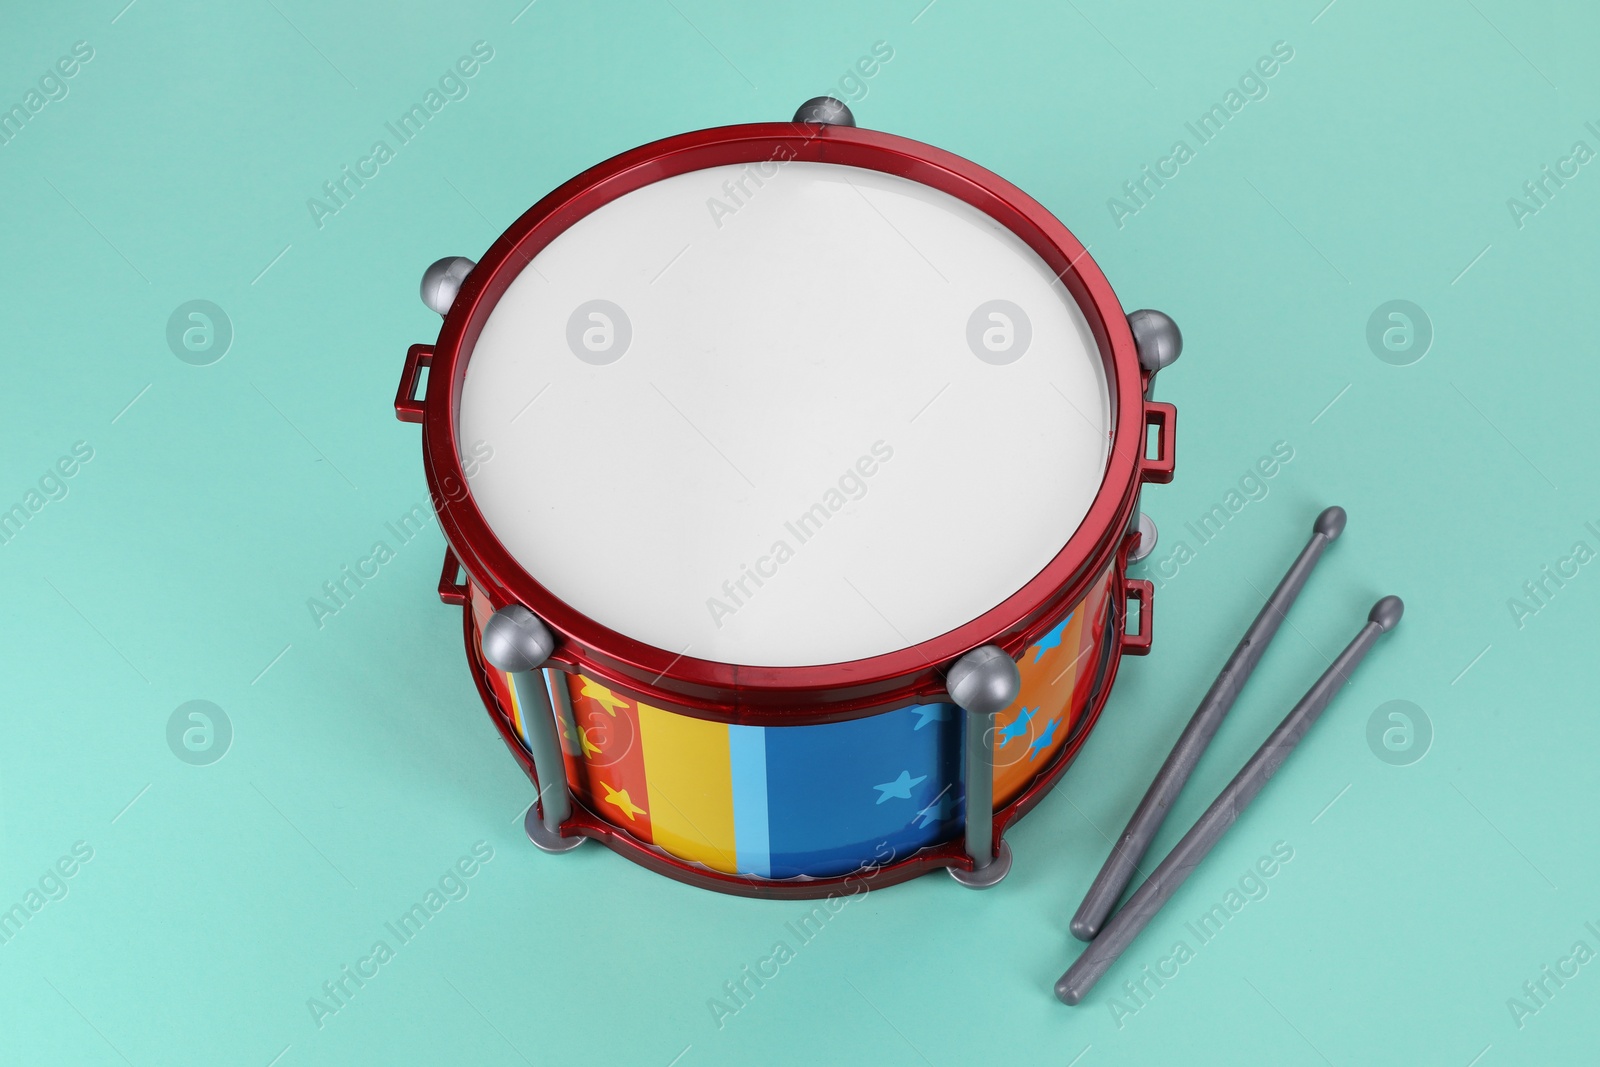 Photo of Children's drum with drumsticks on turquoise background